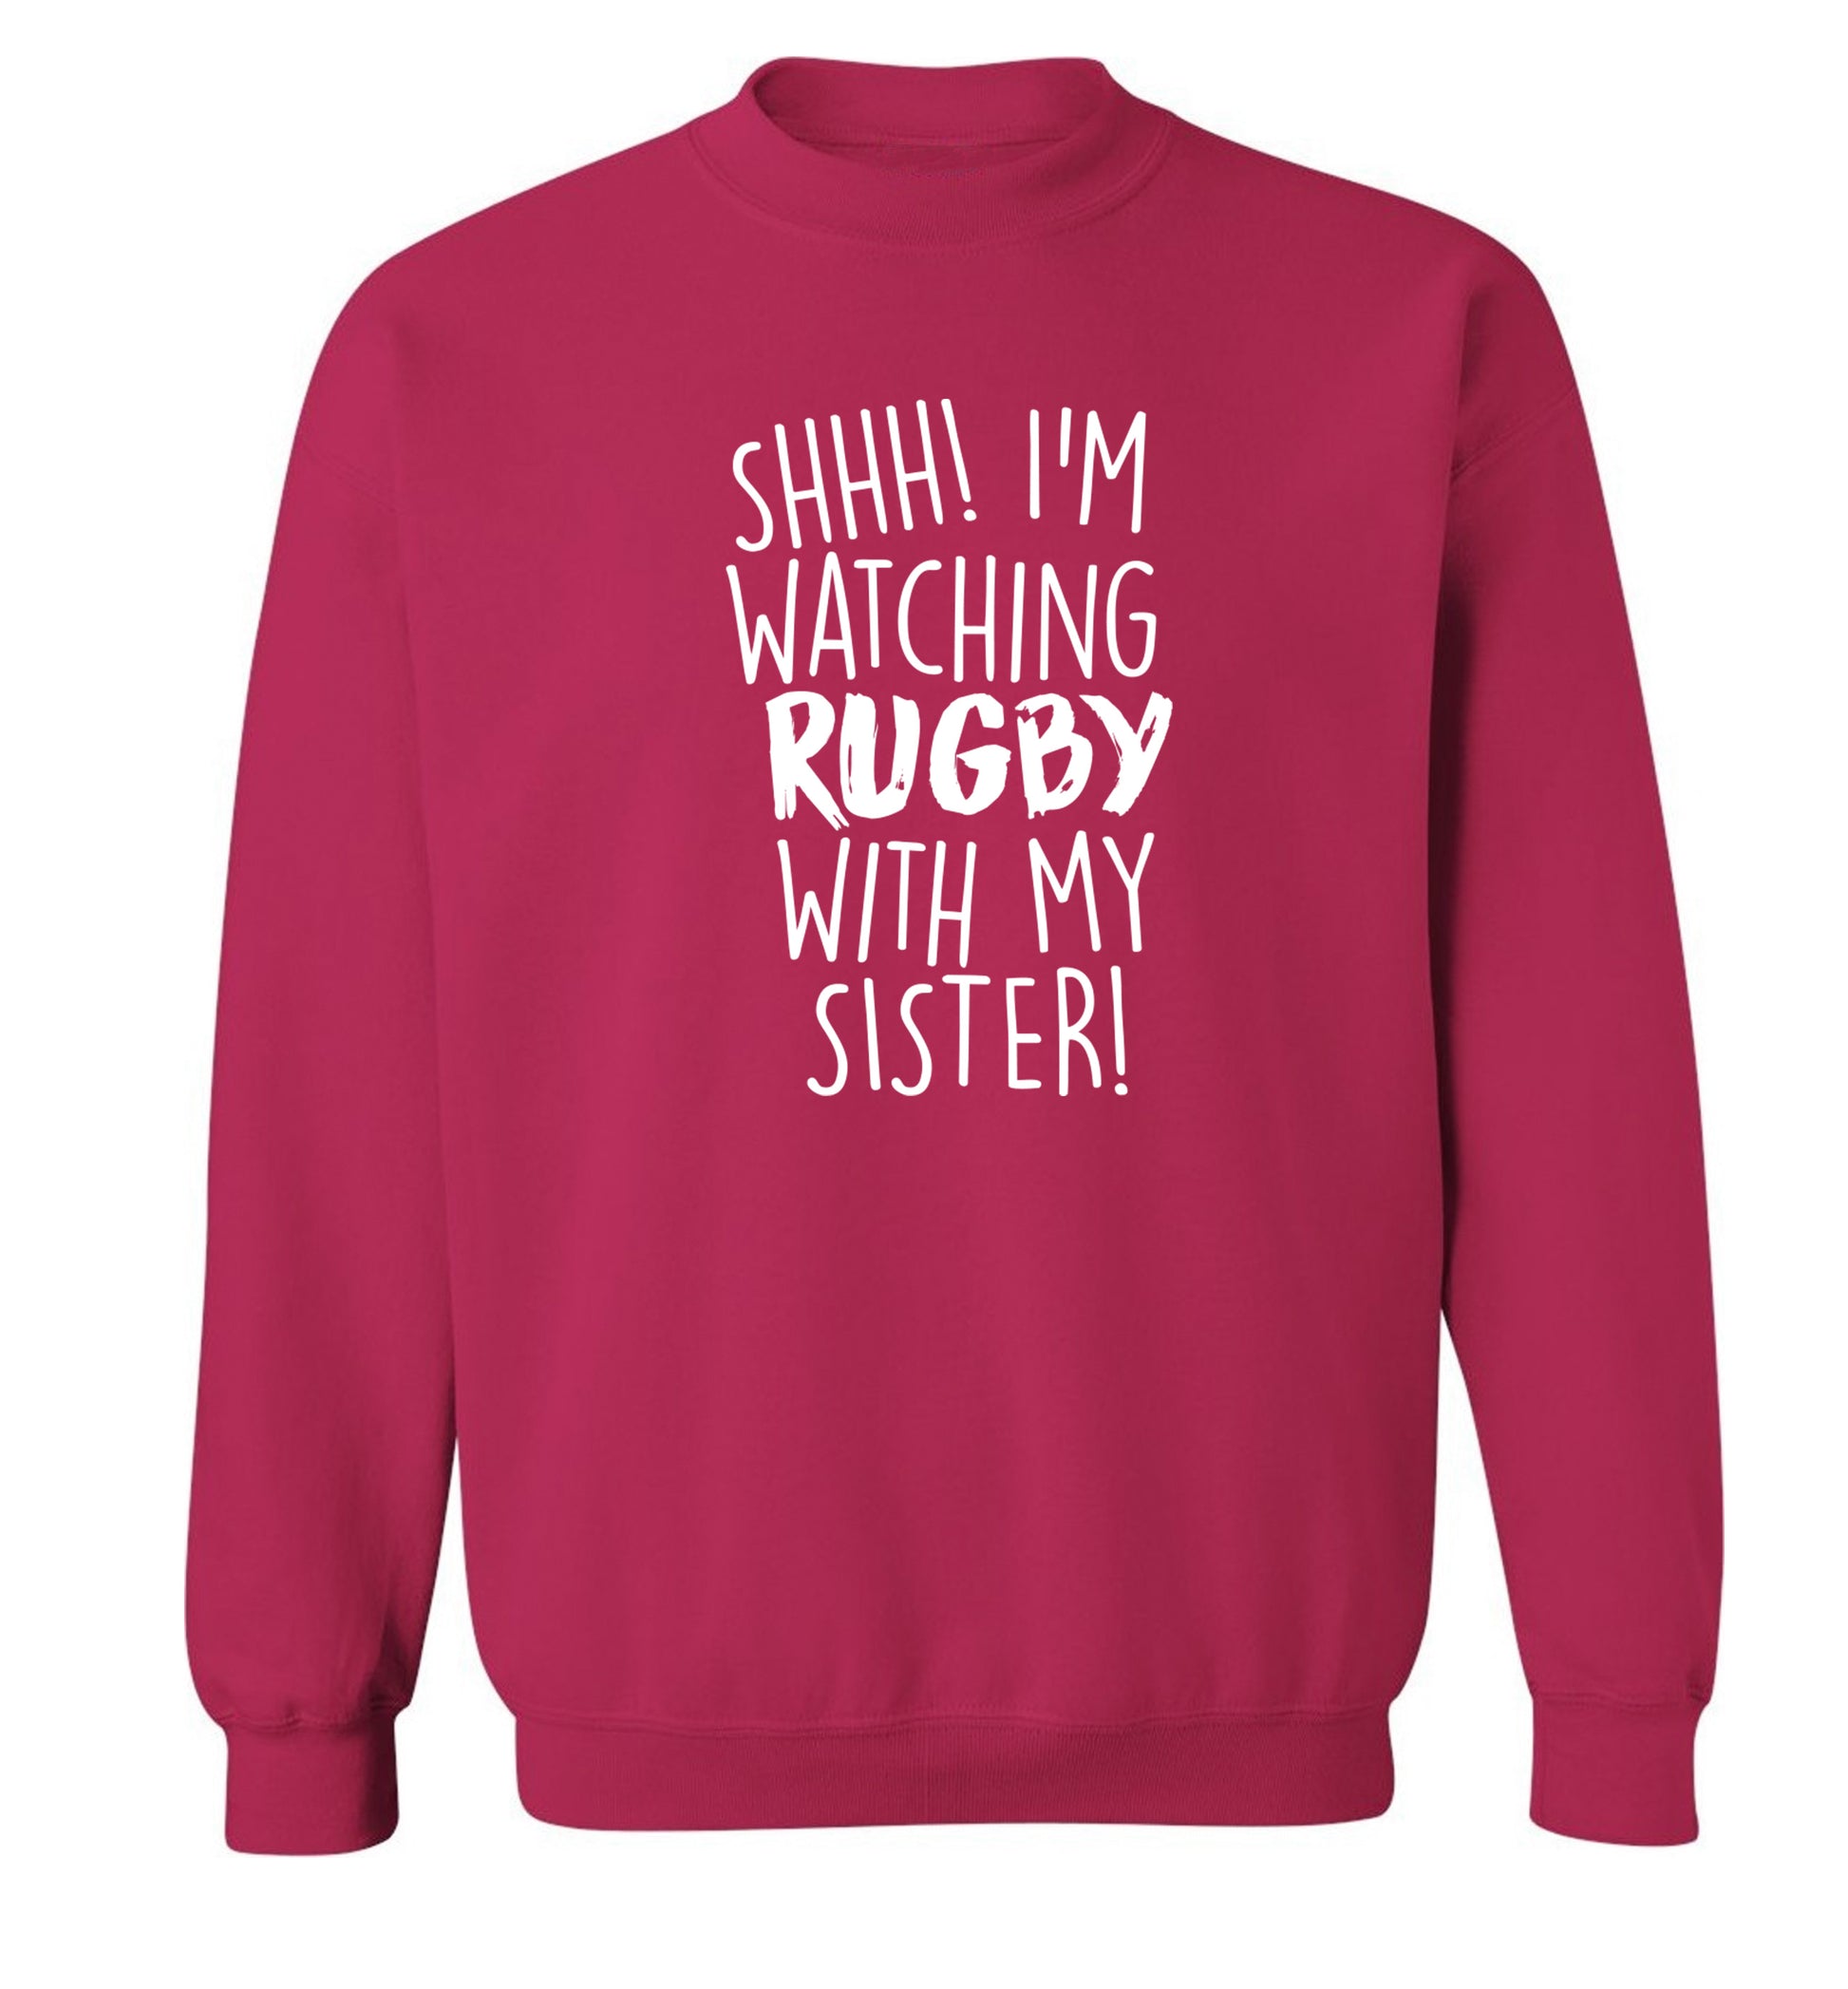 Shh... I'm watching rugby with my sister Adult's unisex pink Sweater 2XL